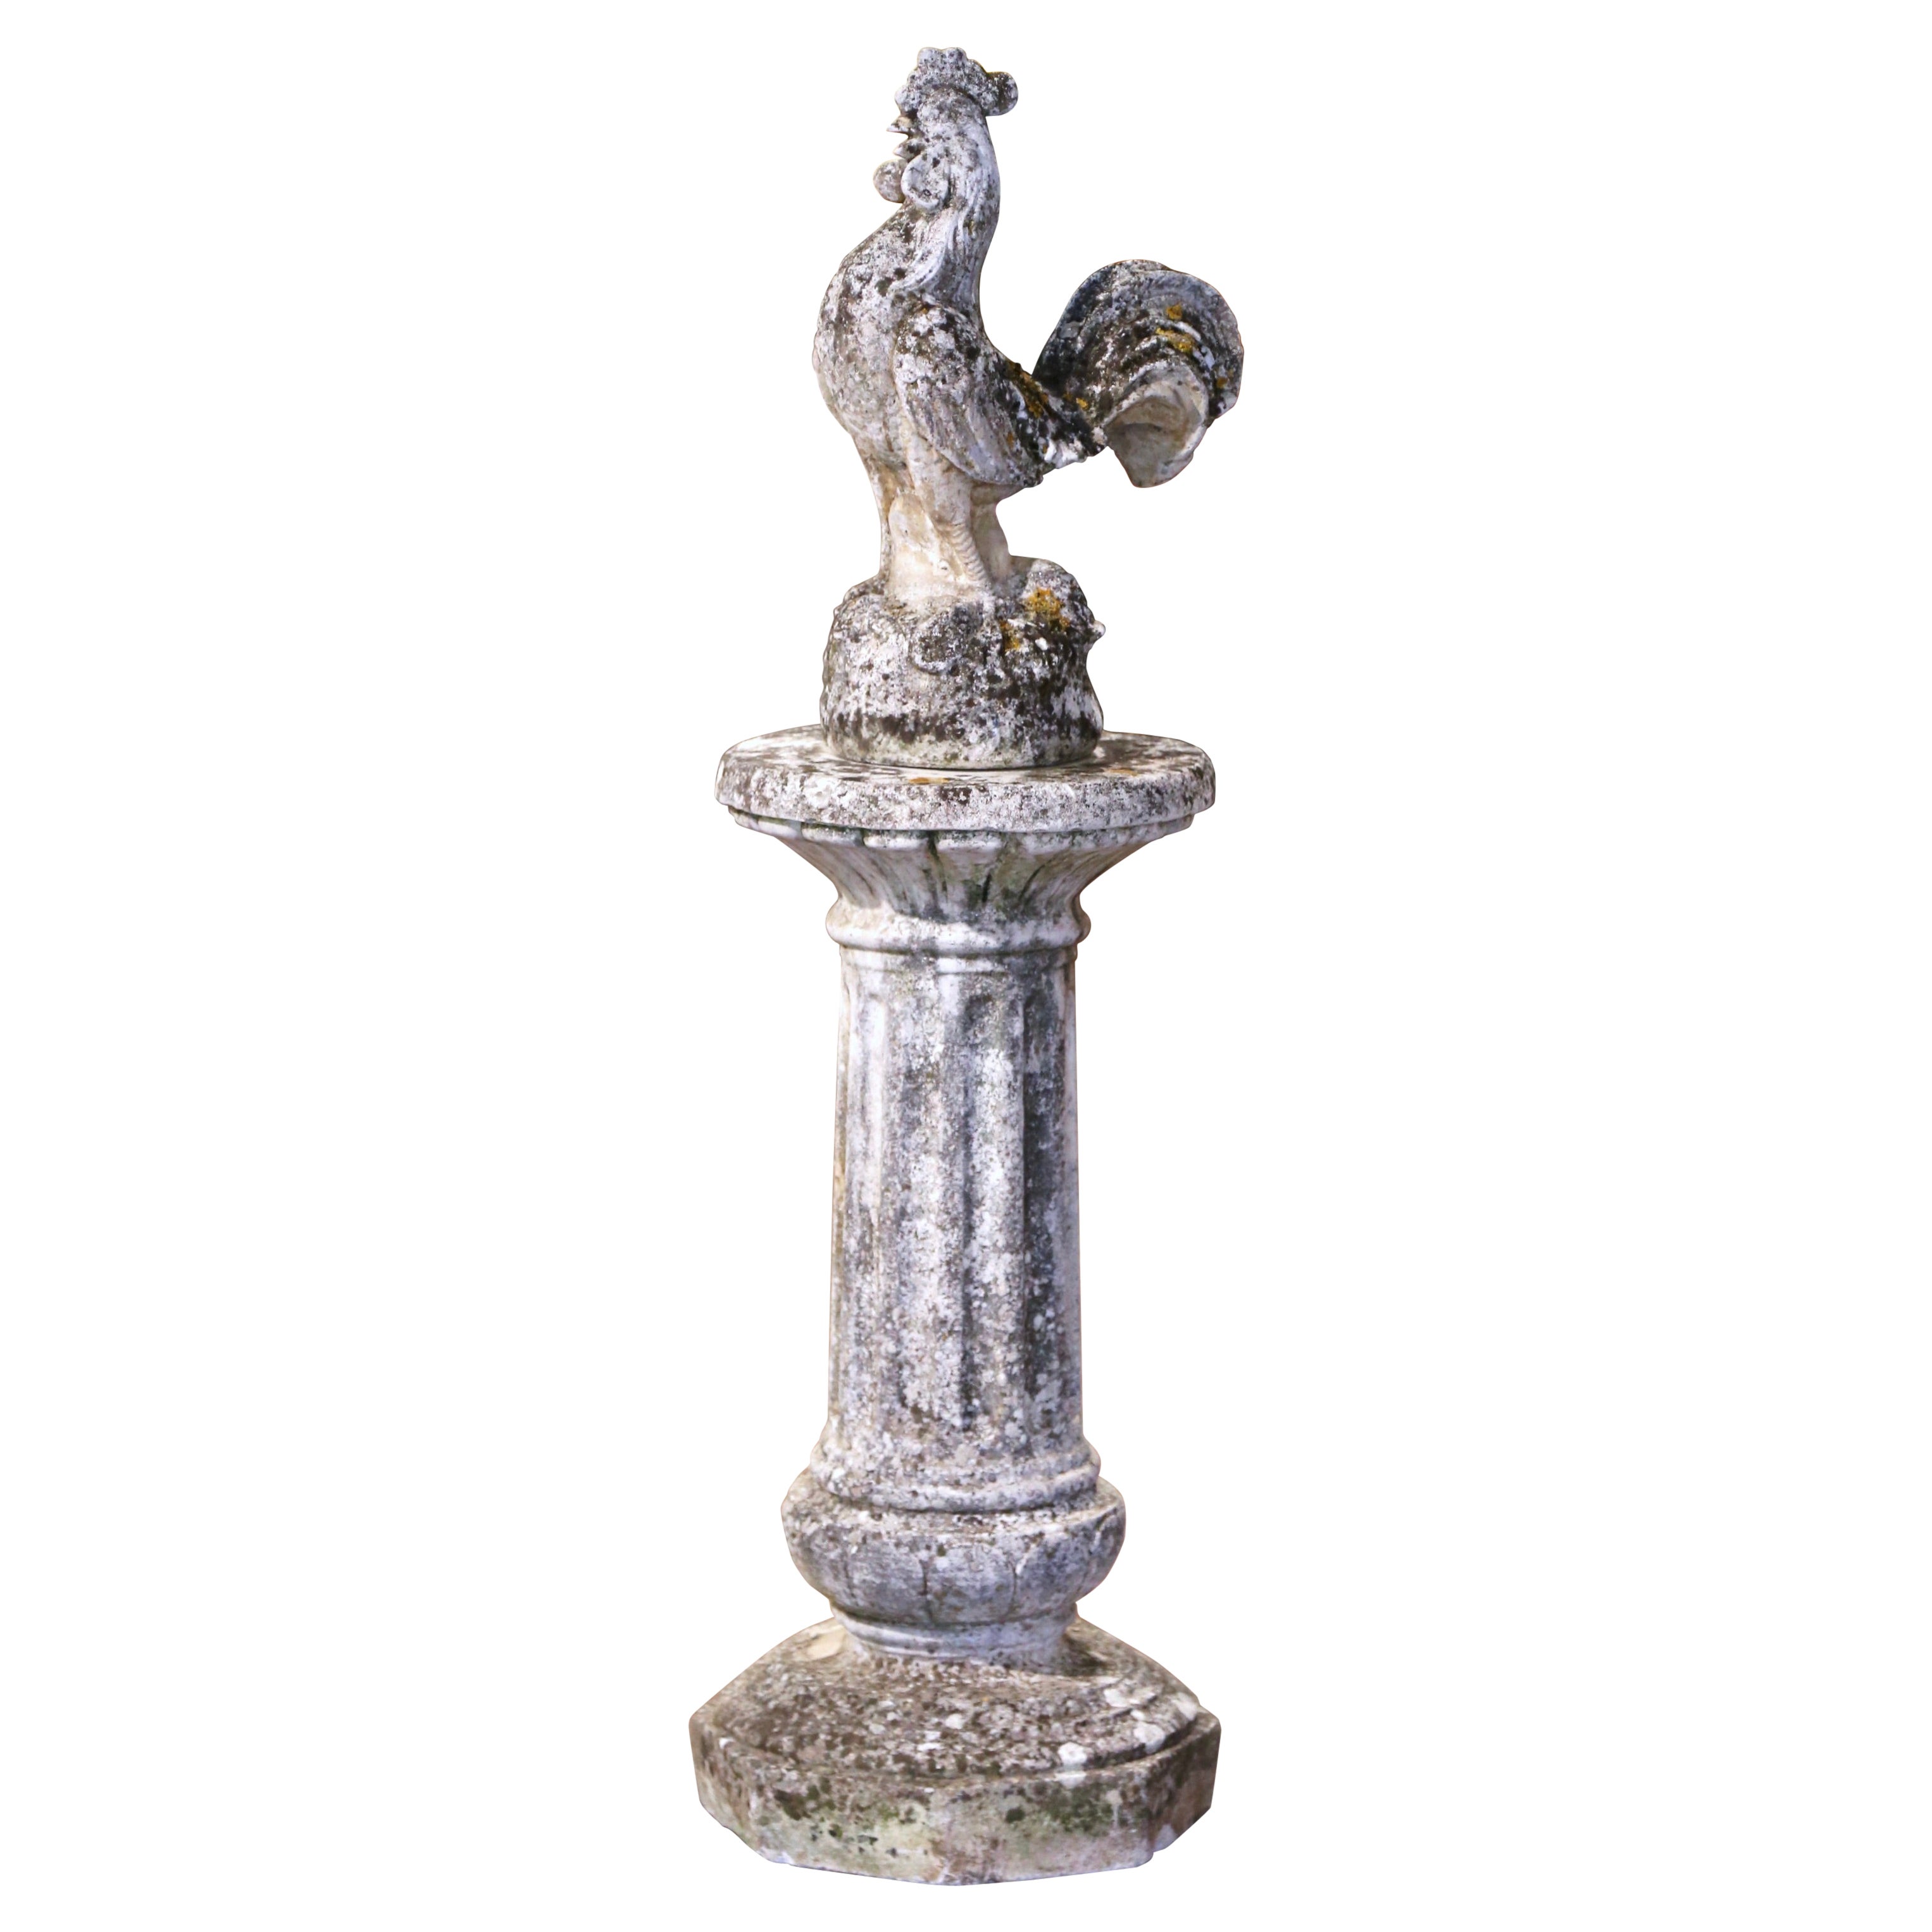 Early 20th Century Carved Stone Pedestal and Rooster Sculpture Garden Statuary For Sale